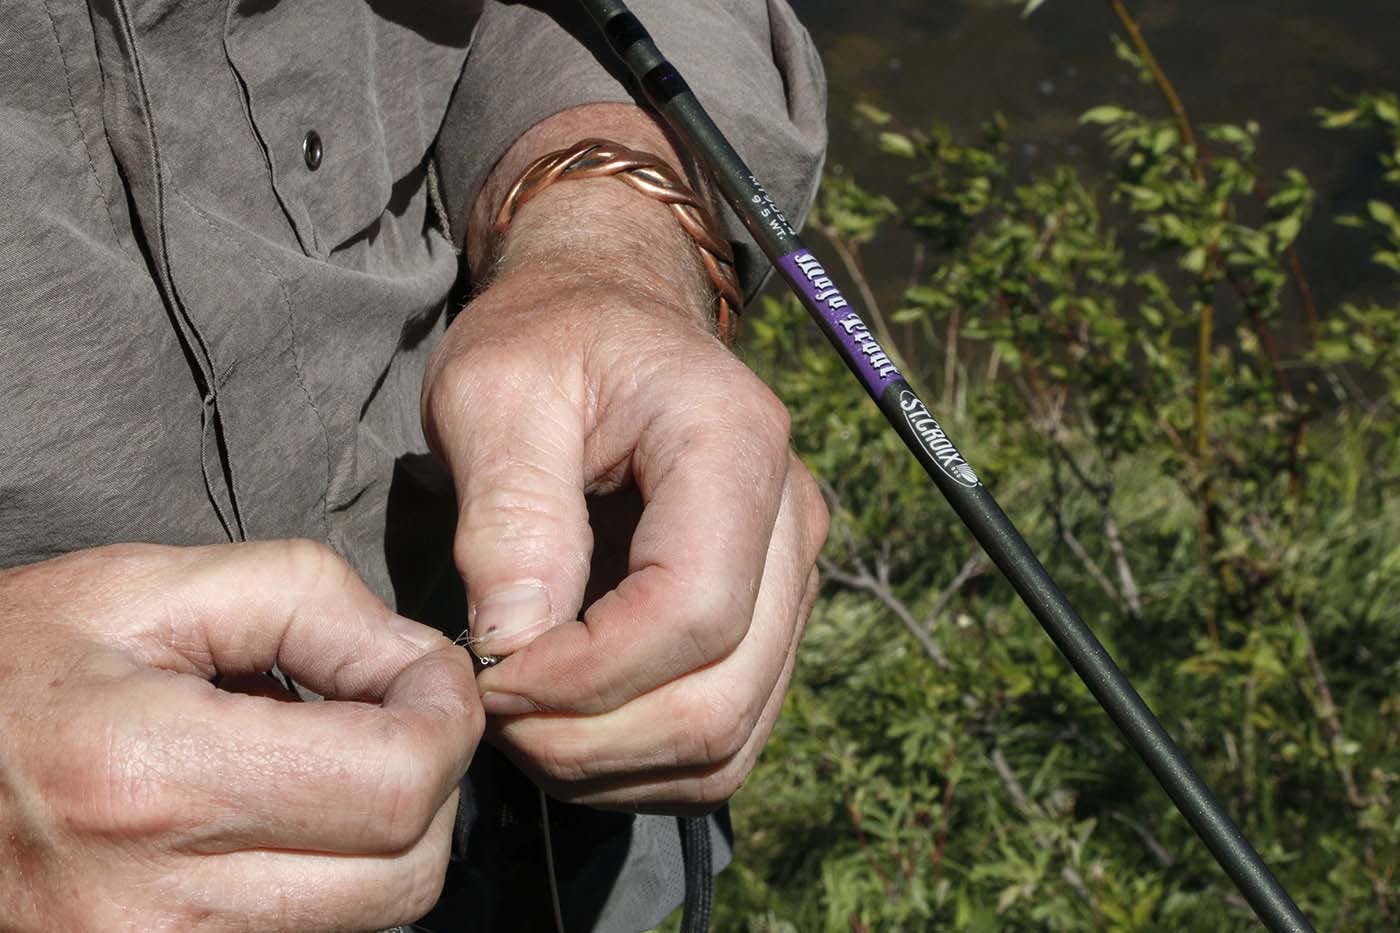 St. Croix Mojo Trout Fly Rod